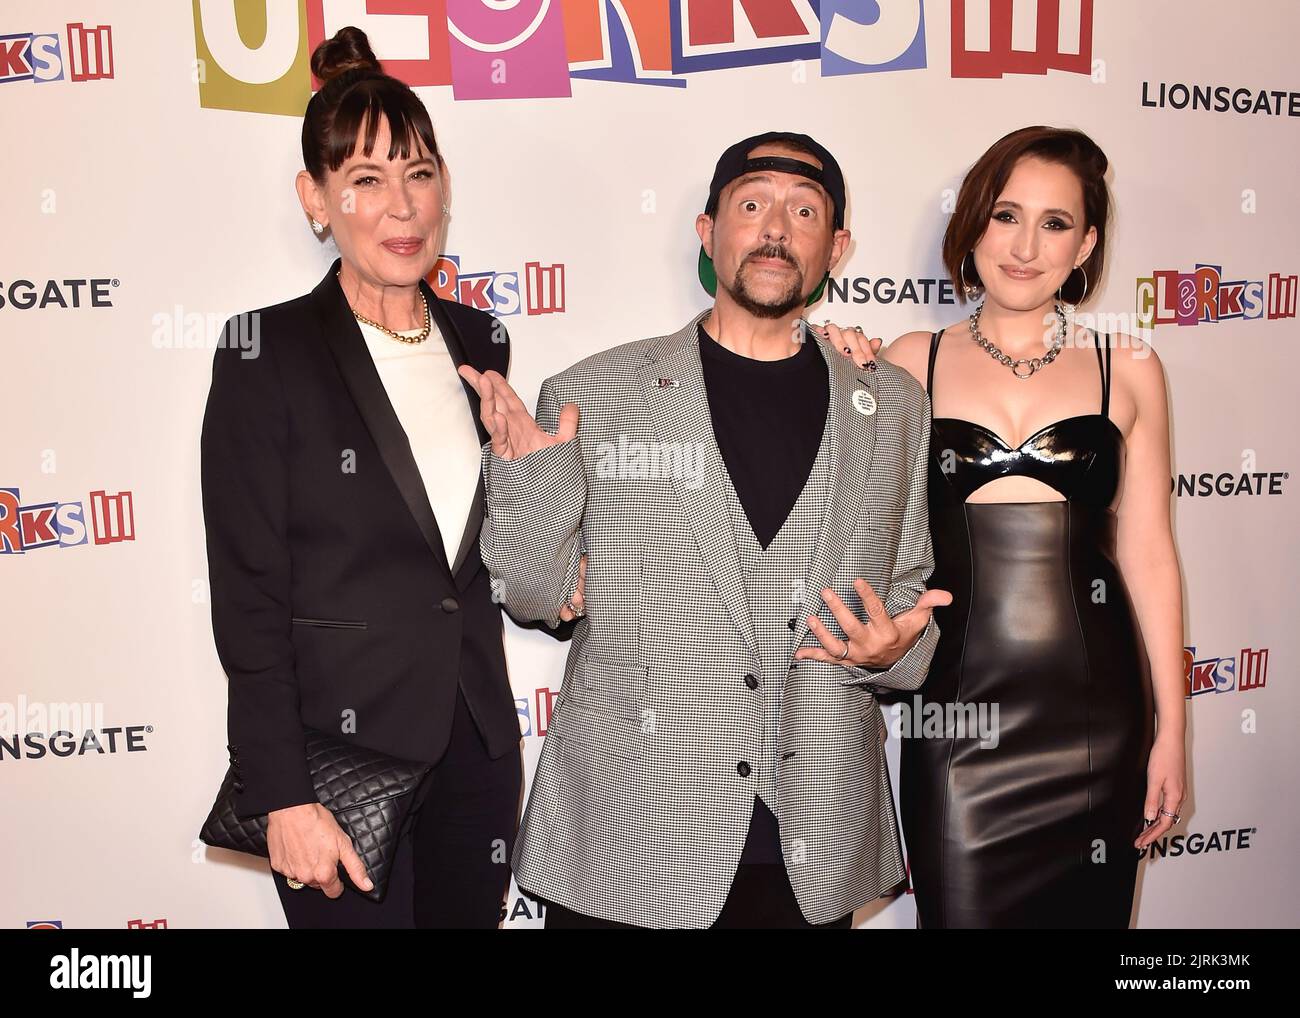 Los Angeles, USA. 24th Aug, 2022. Jennifer Schwalbach Smith, Kevin Smith and Harley Quinn Smith walking the red carpet at the Los Angeles premiere of 'Clerks III' at TCL Chinese 6 Theatres in Los Angeles, CA on August 24, 2022. (Photo By Scott Kirkland/Sipa USA) Credit: Sipa USA/Alamy Live News Stock Photo